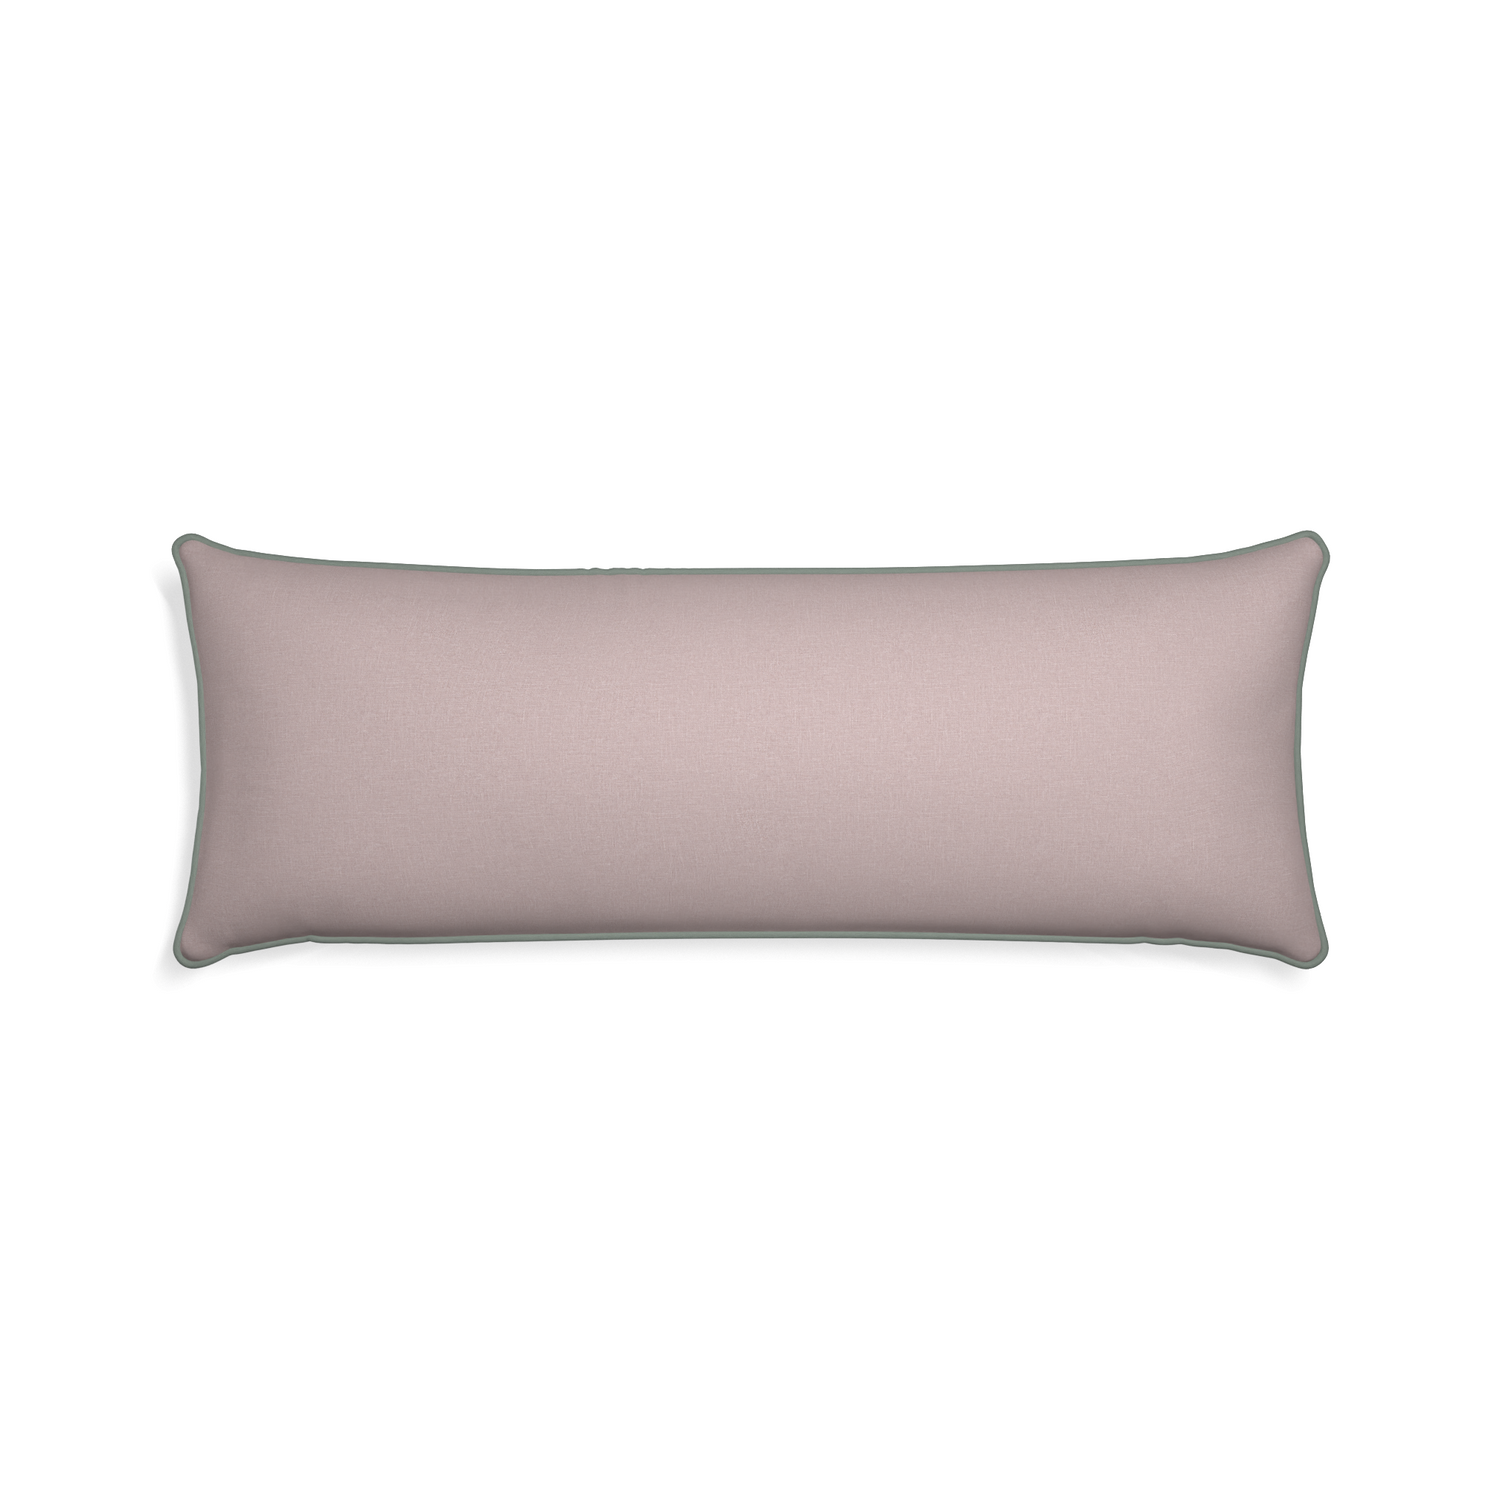 Xl-lumbar orchid custom mauve pinkpillow with sage piping on white background